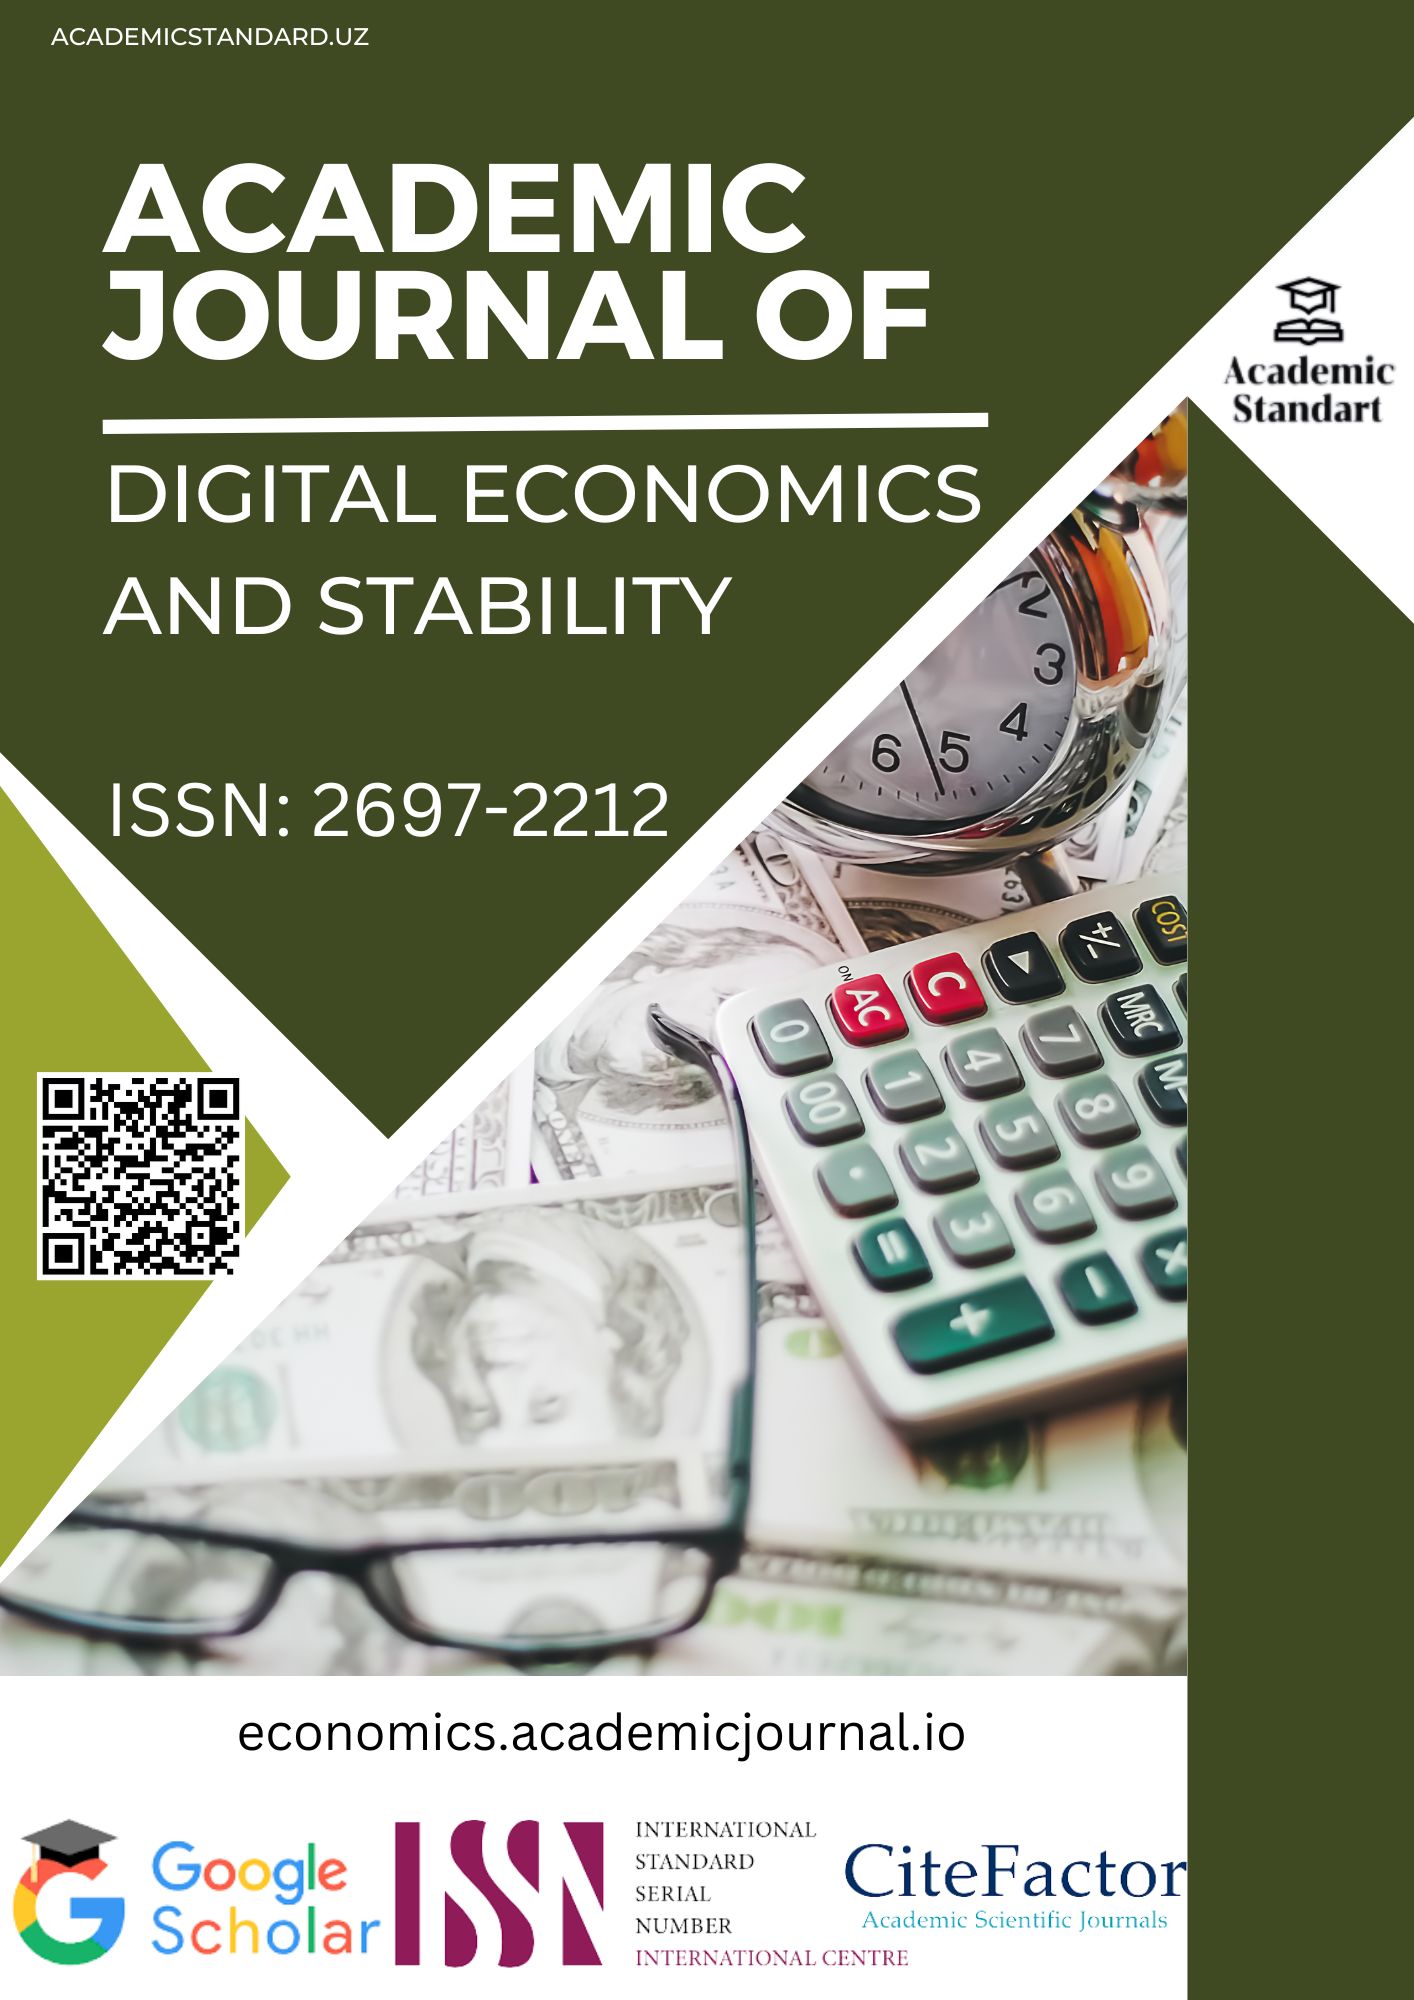 Academic Journal of Digital Economics and Stability